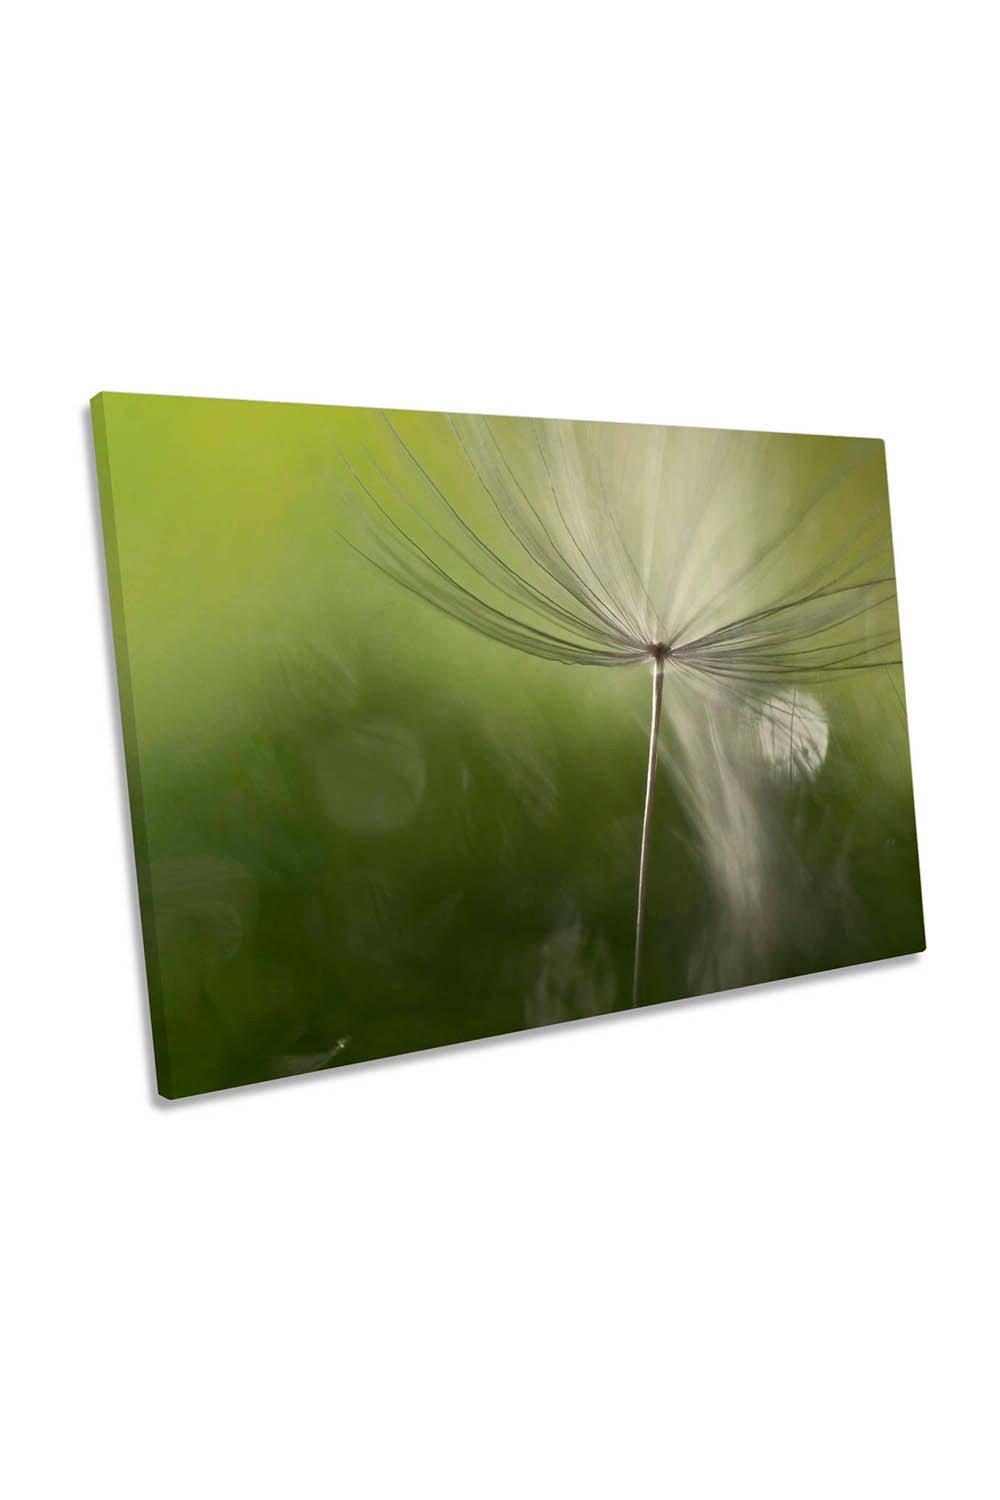 Shadows in the Green Floral Canvas Wall Art Picture Print